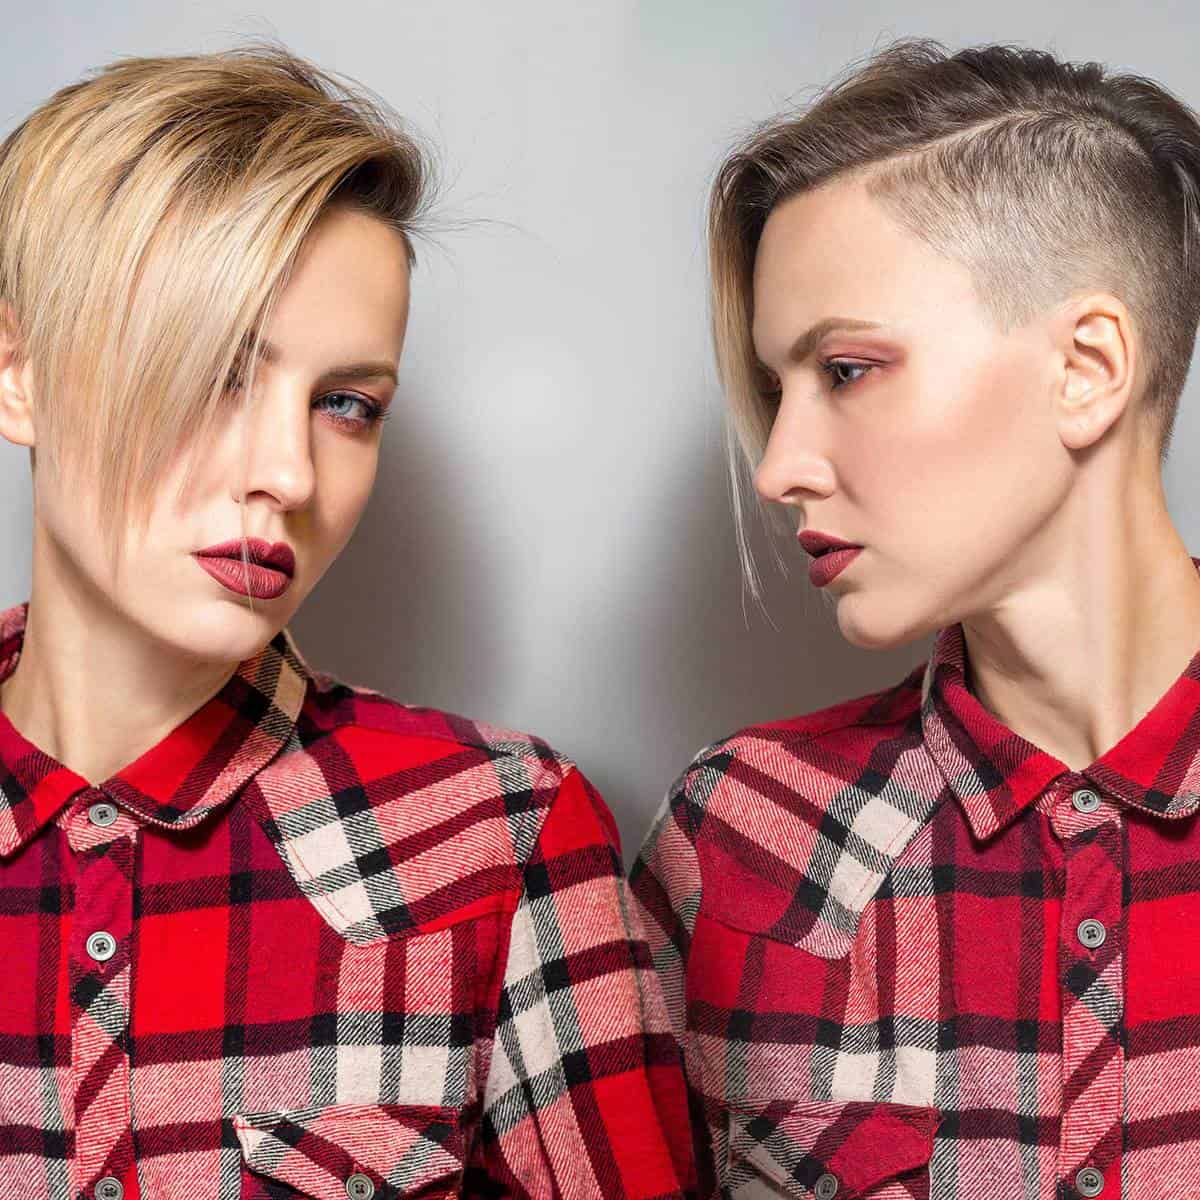 Studio portrait of a fashion blonde with short hair wearing checkered shirt